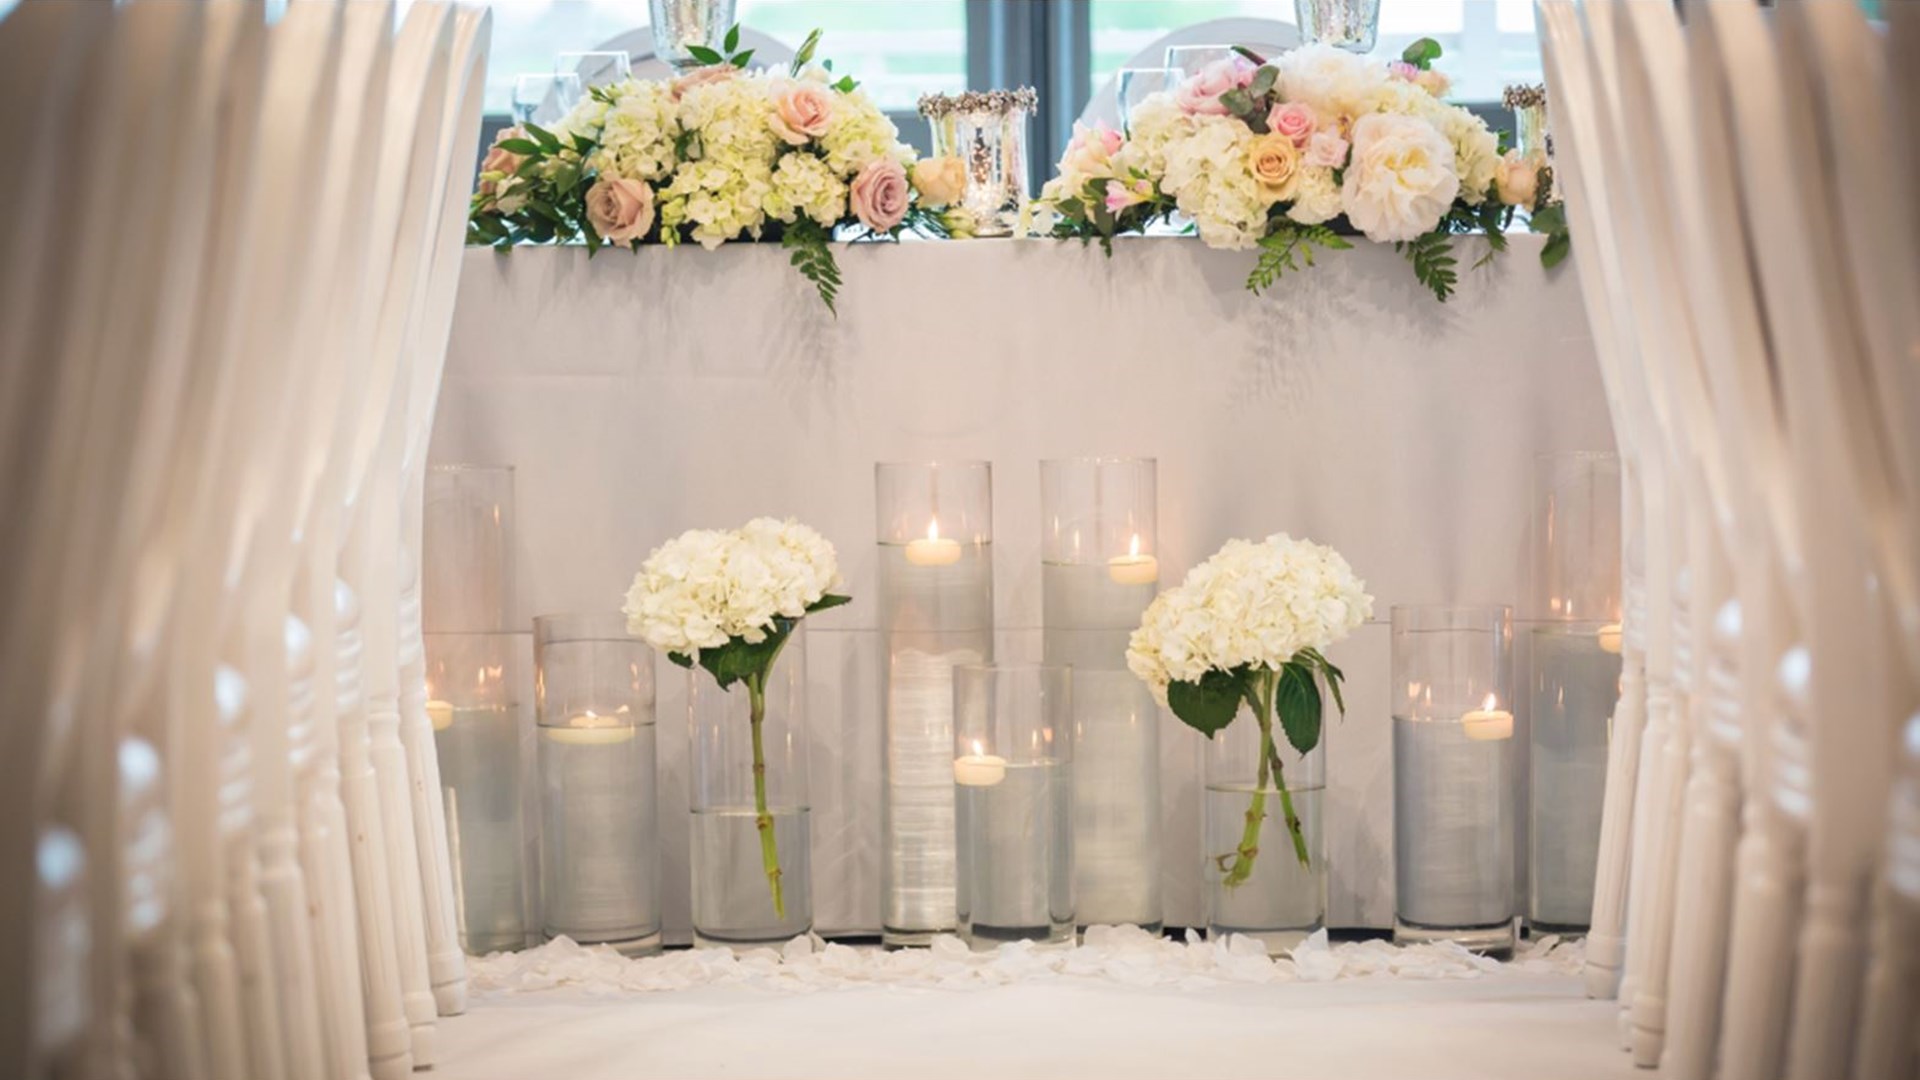 Traditional Weddings at The Belfry